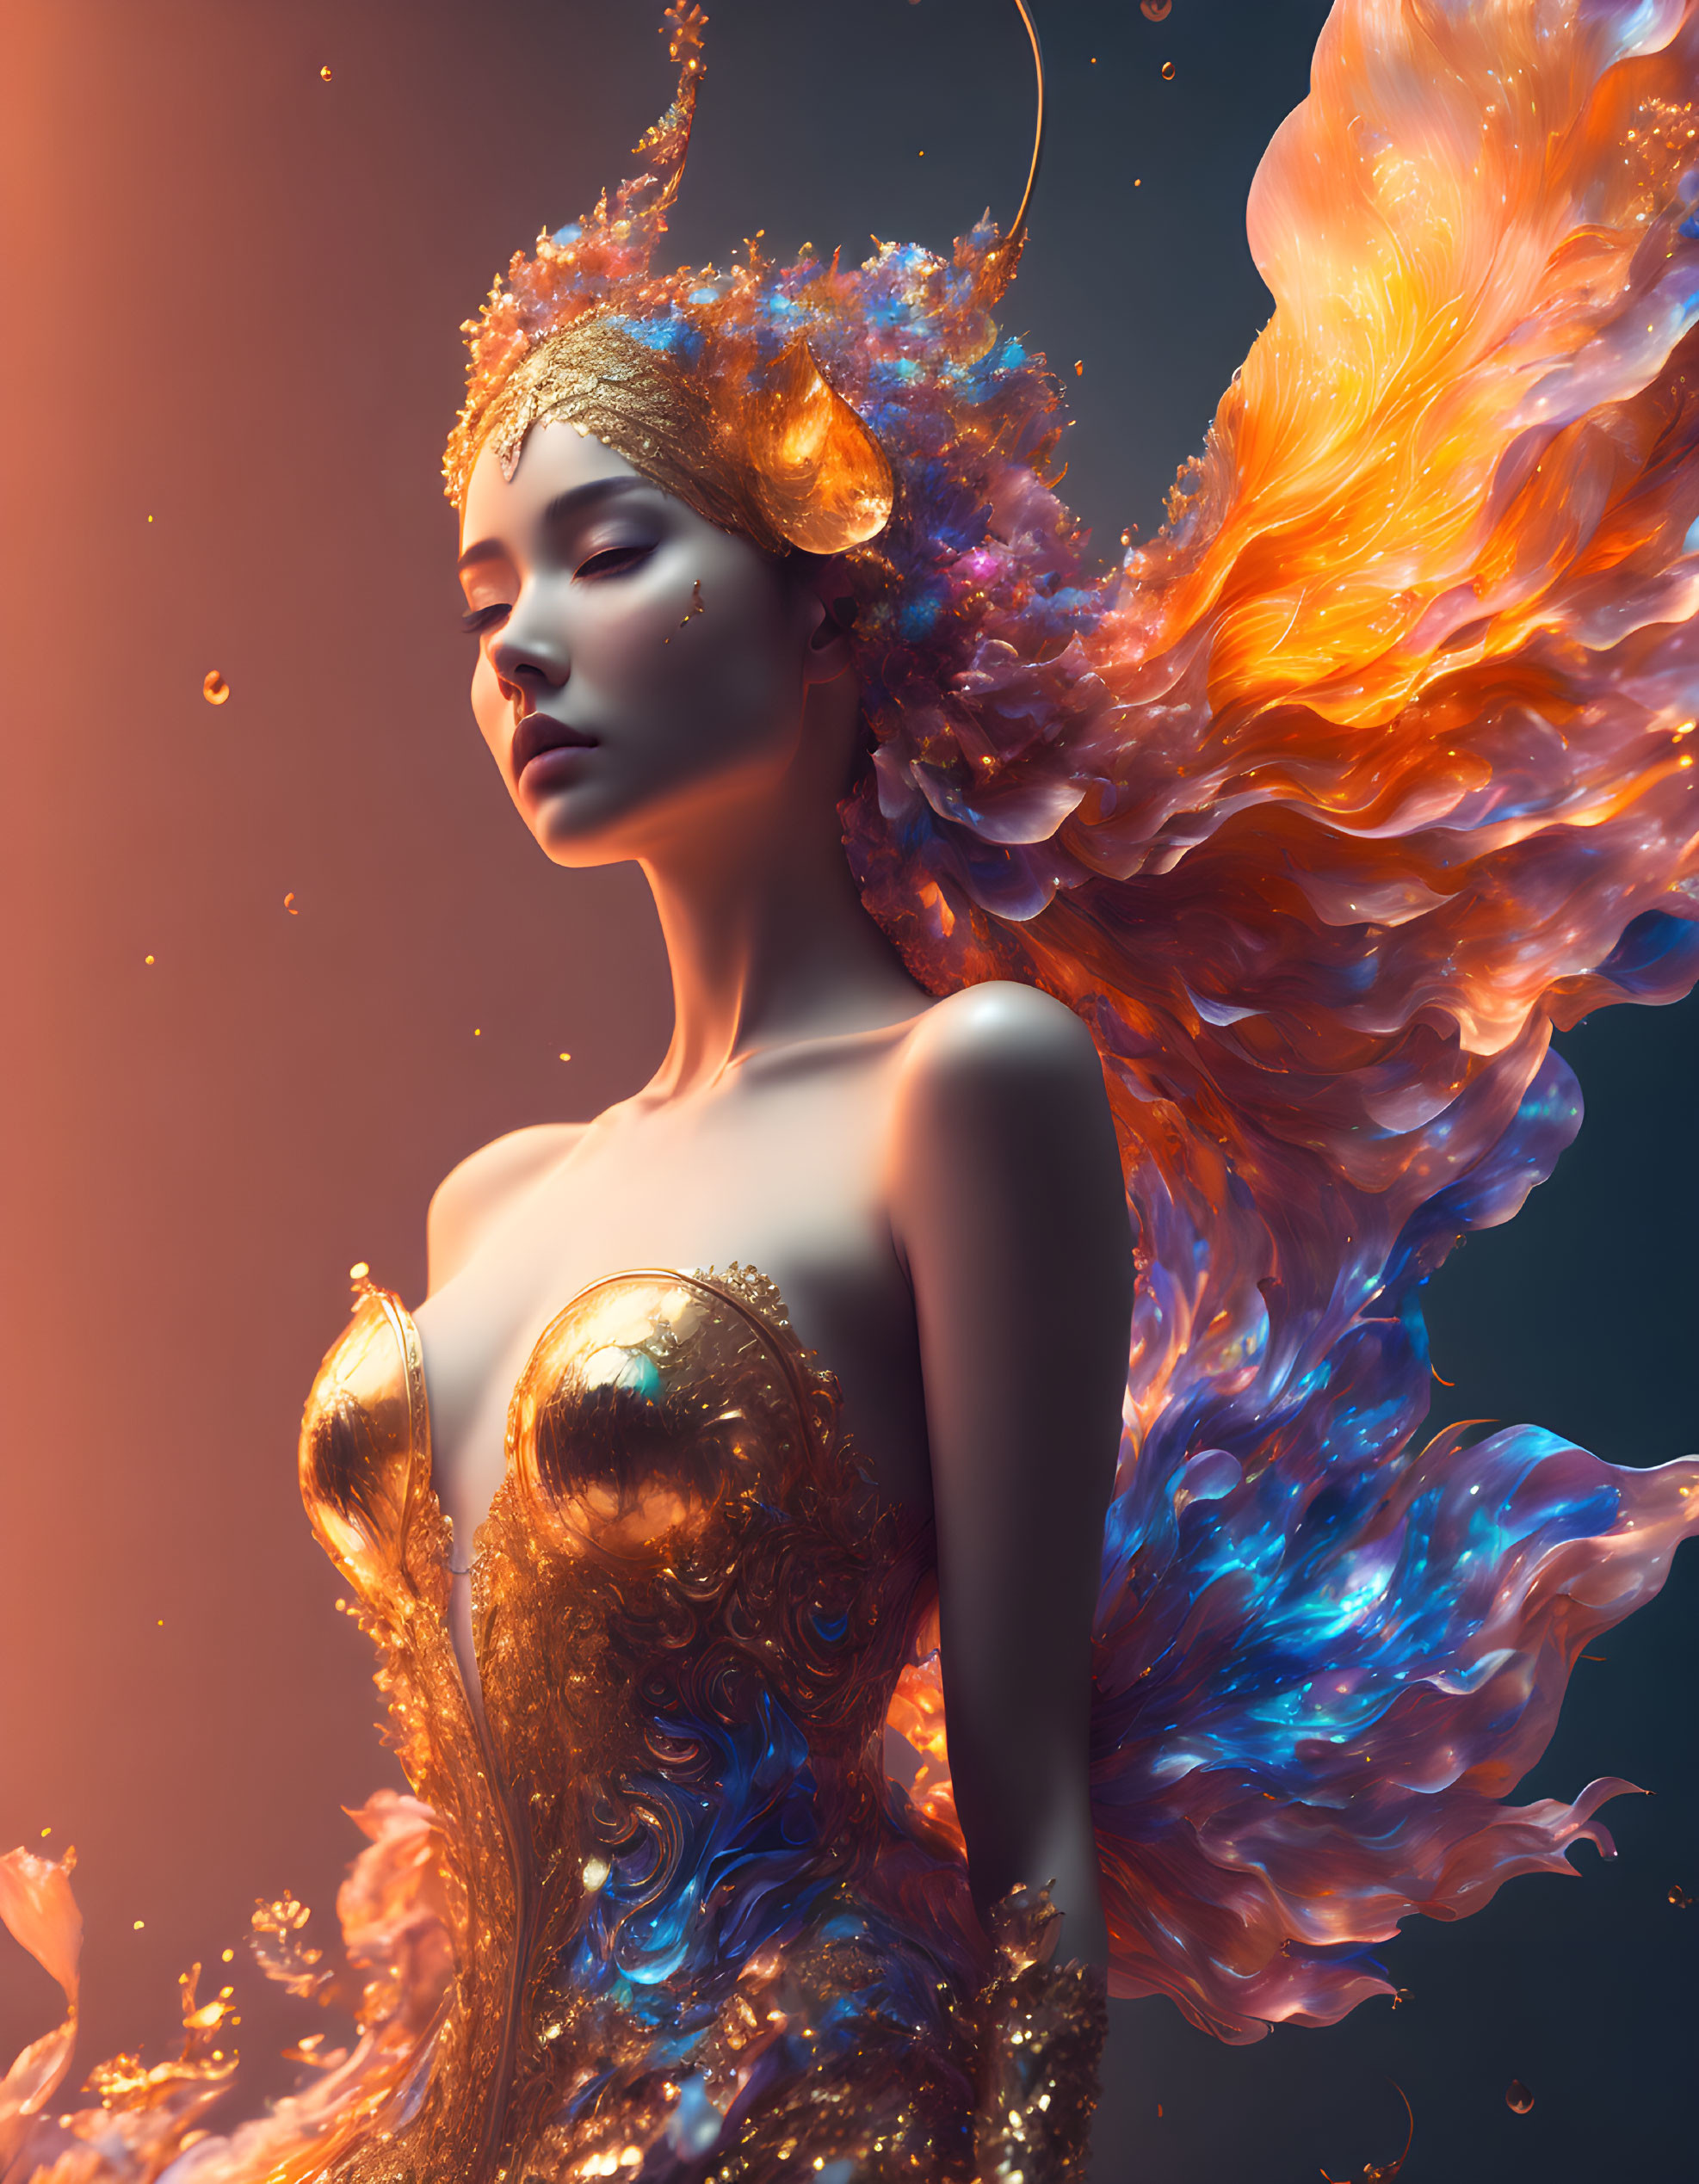 Golden figure in ethereal flames and particles with crown, blue and orange hues